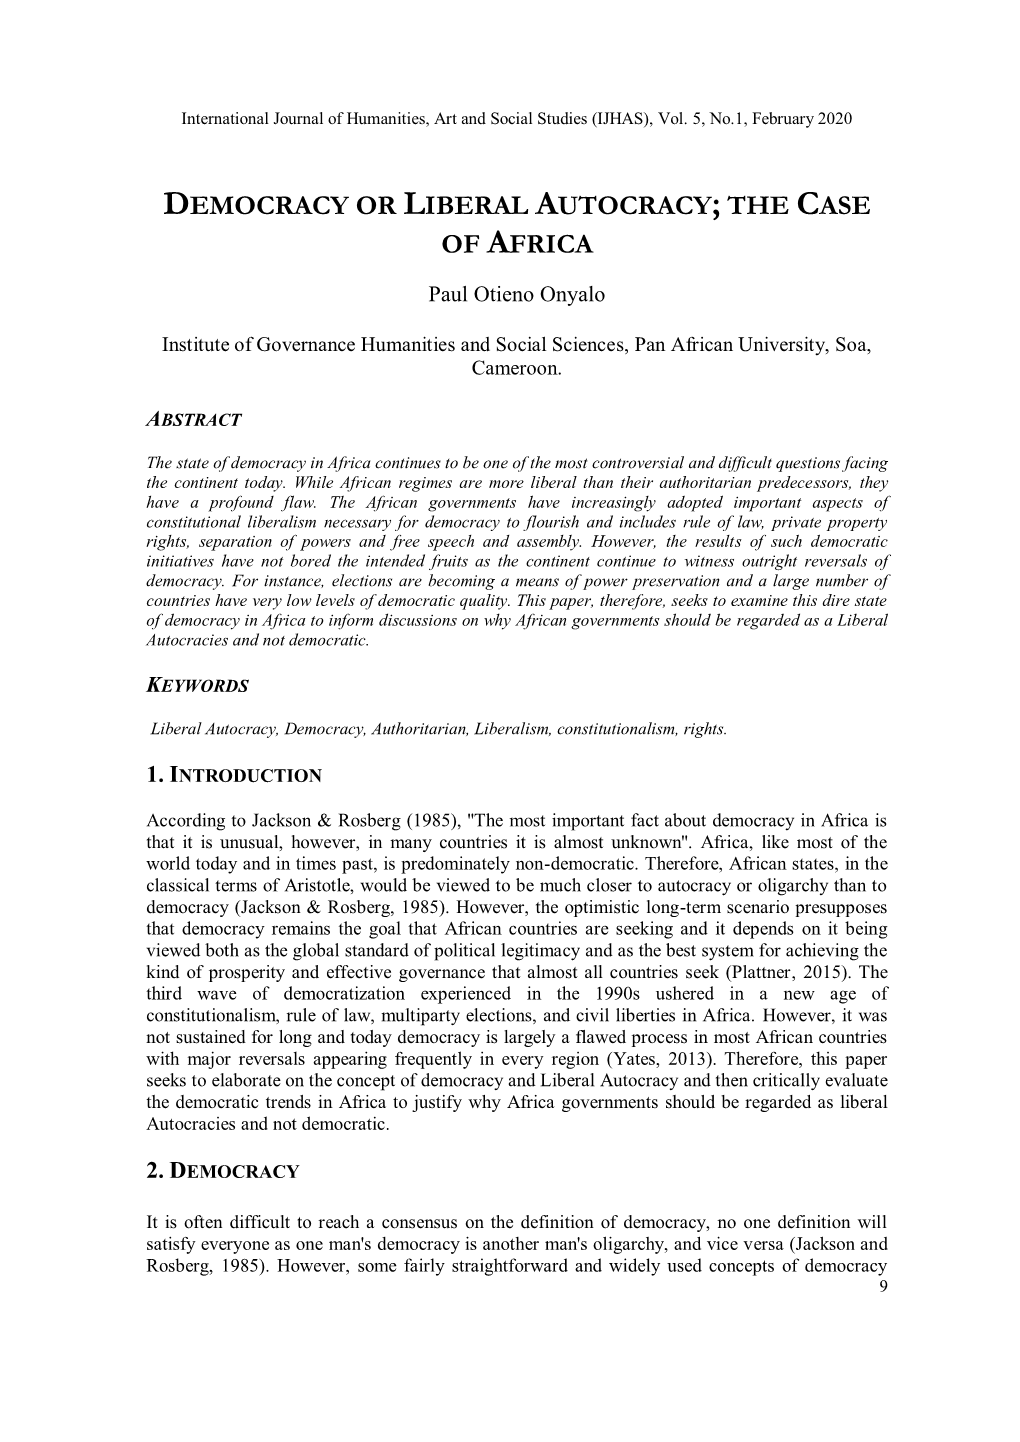 Democracy Or Liberal Autocracy; the Case of Africa